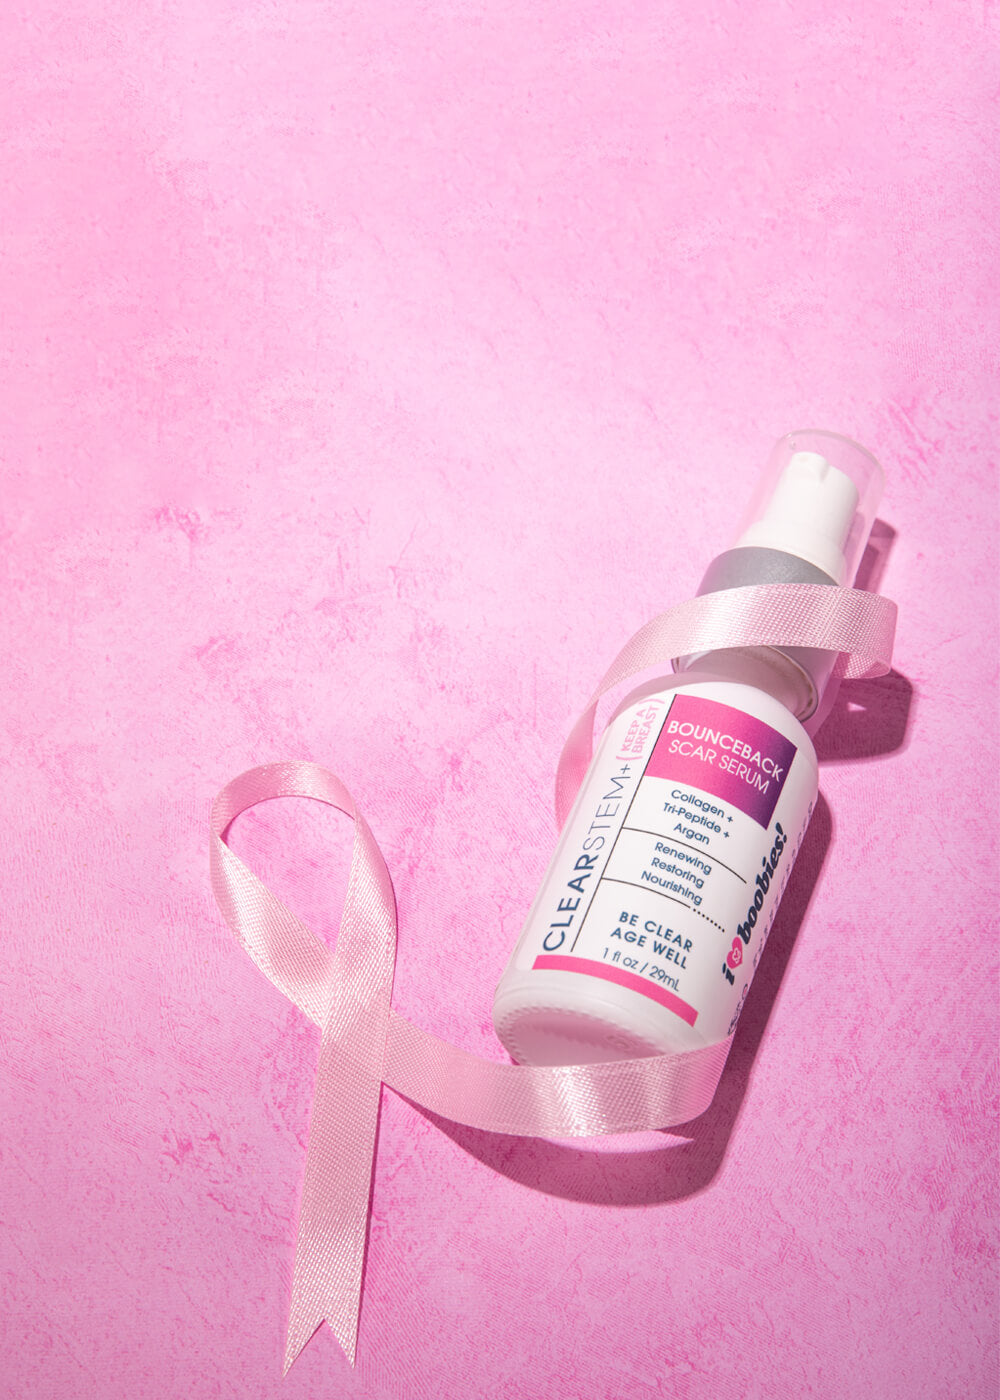 a pink ribbon wrapped around a bottle of clearstem bounceback scar serum 